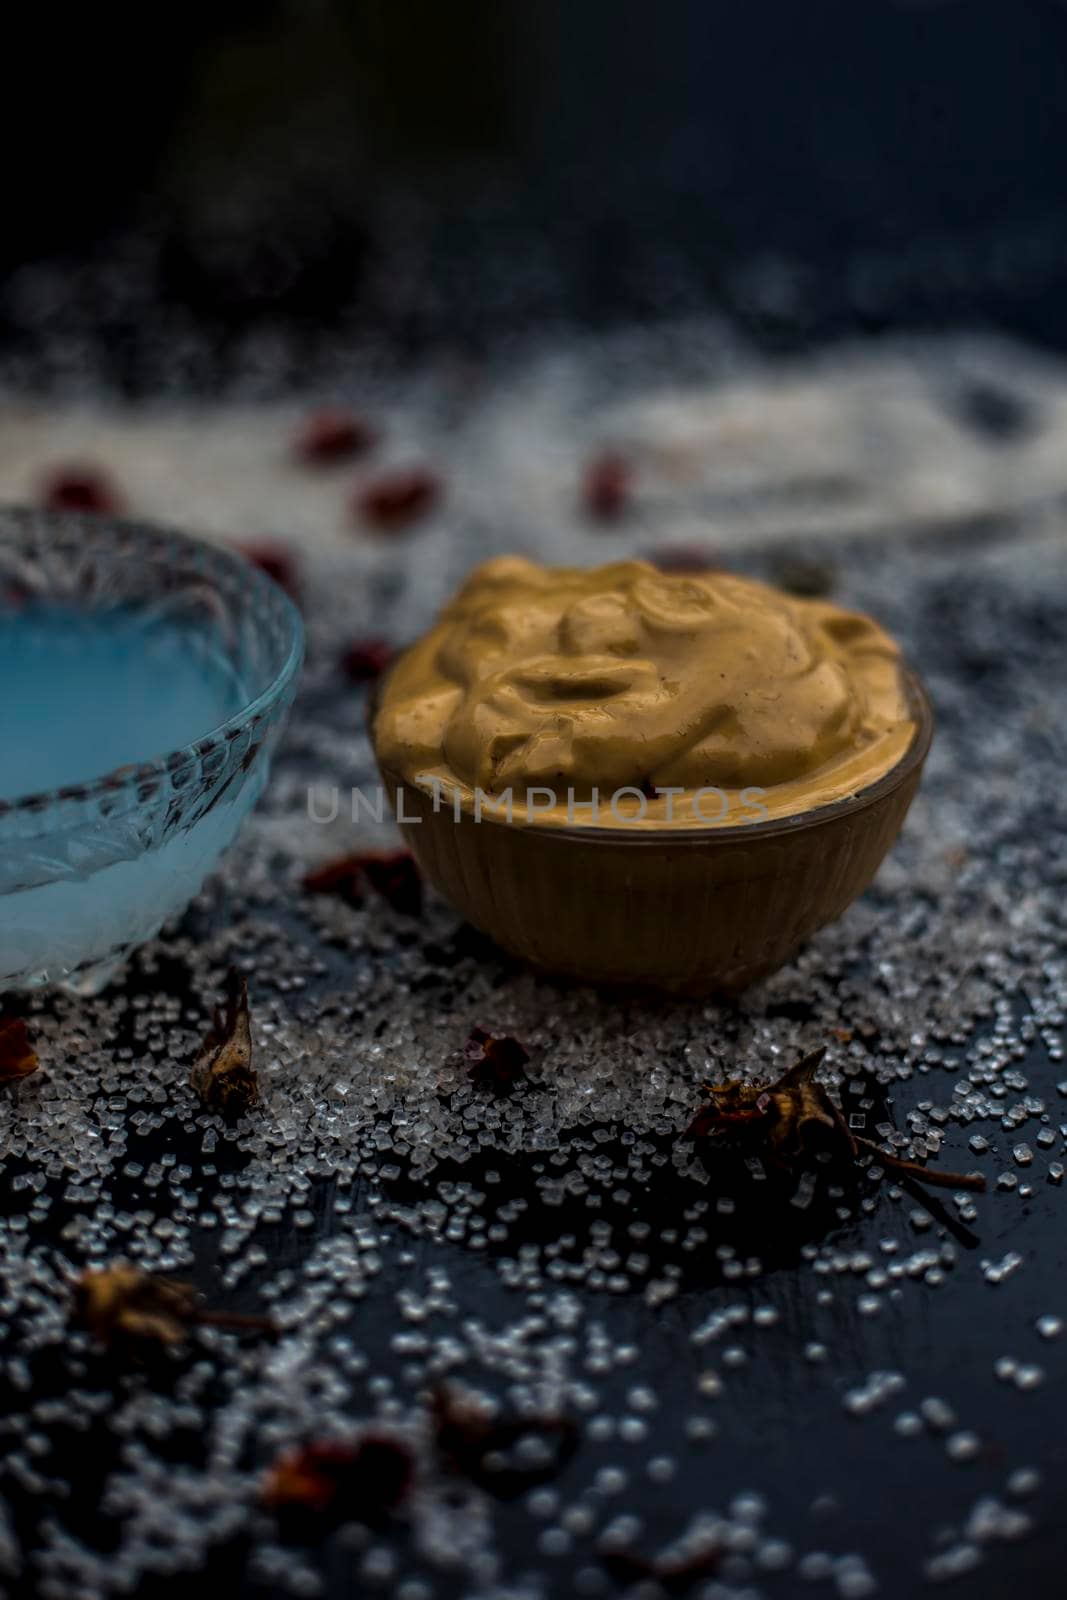 Ubtan/face mask/face pack of Multani mitti or fuller's earth on wooden surface in a glass bowl consisting of Multani mitti and coconut oil for the remedy or treatment of suntan.On the wooden surface.